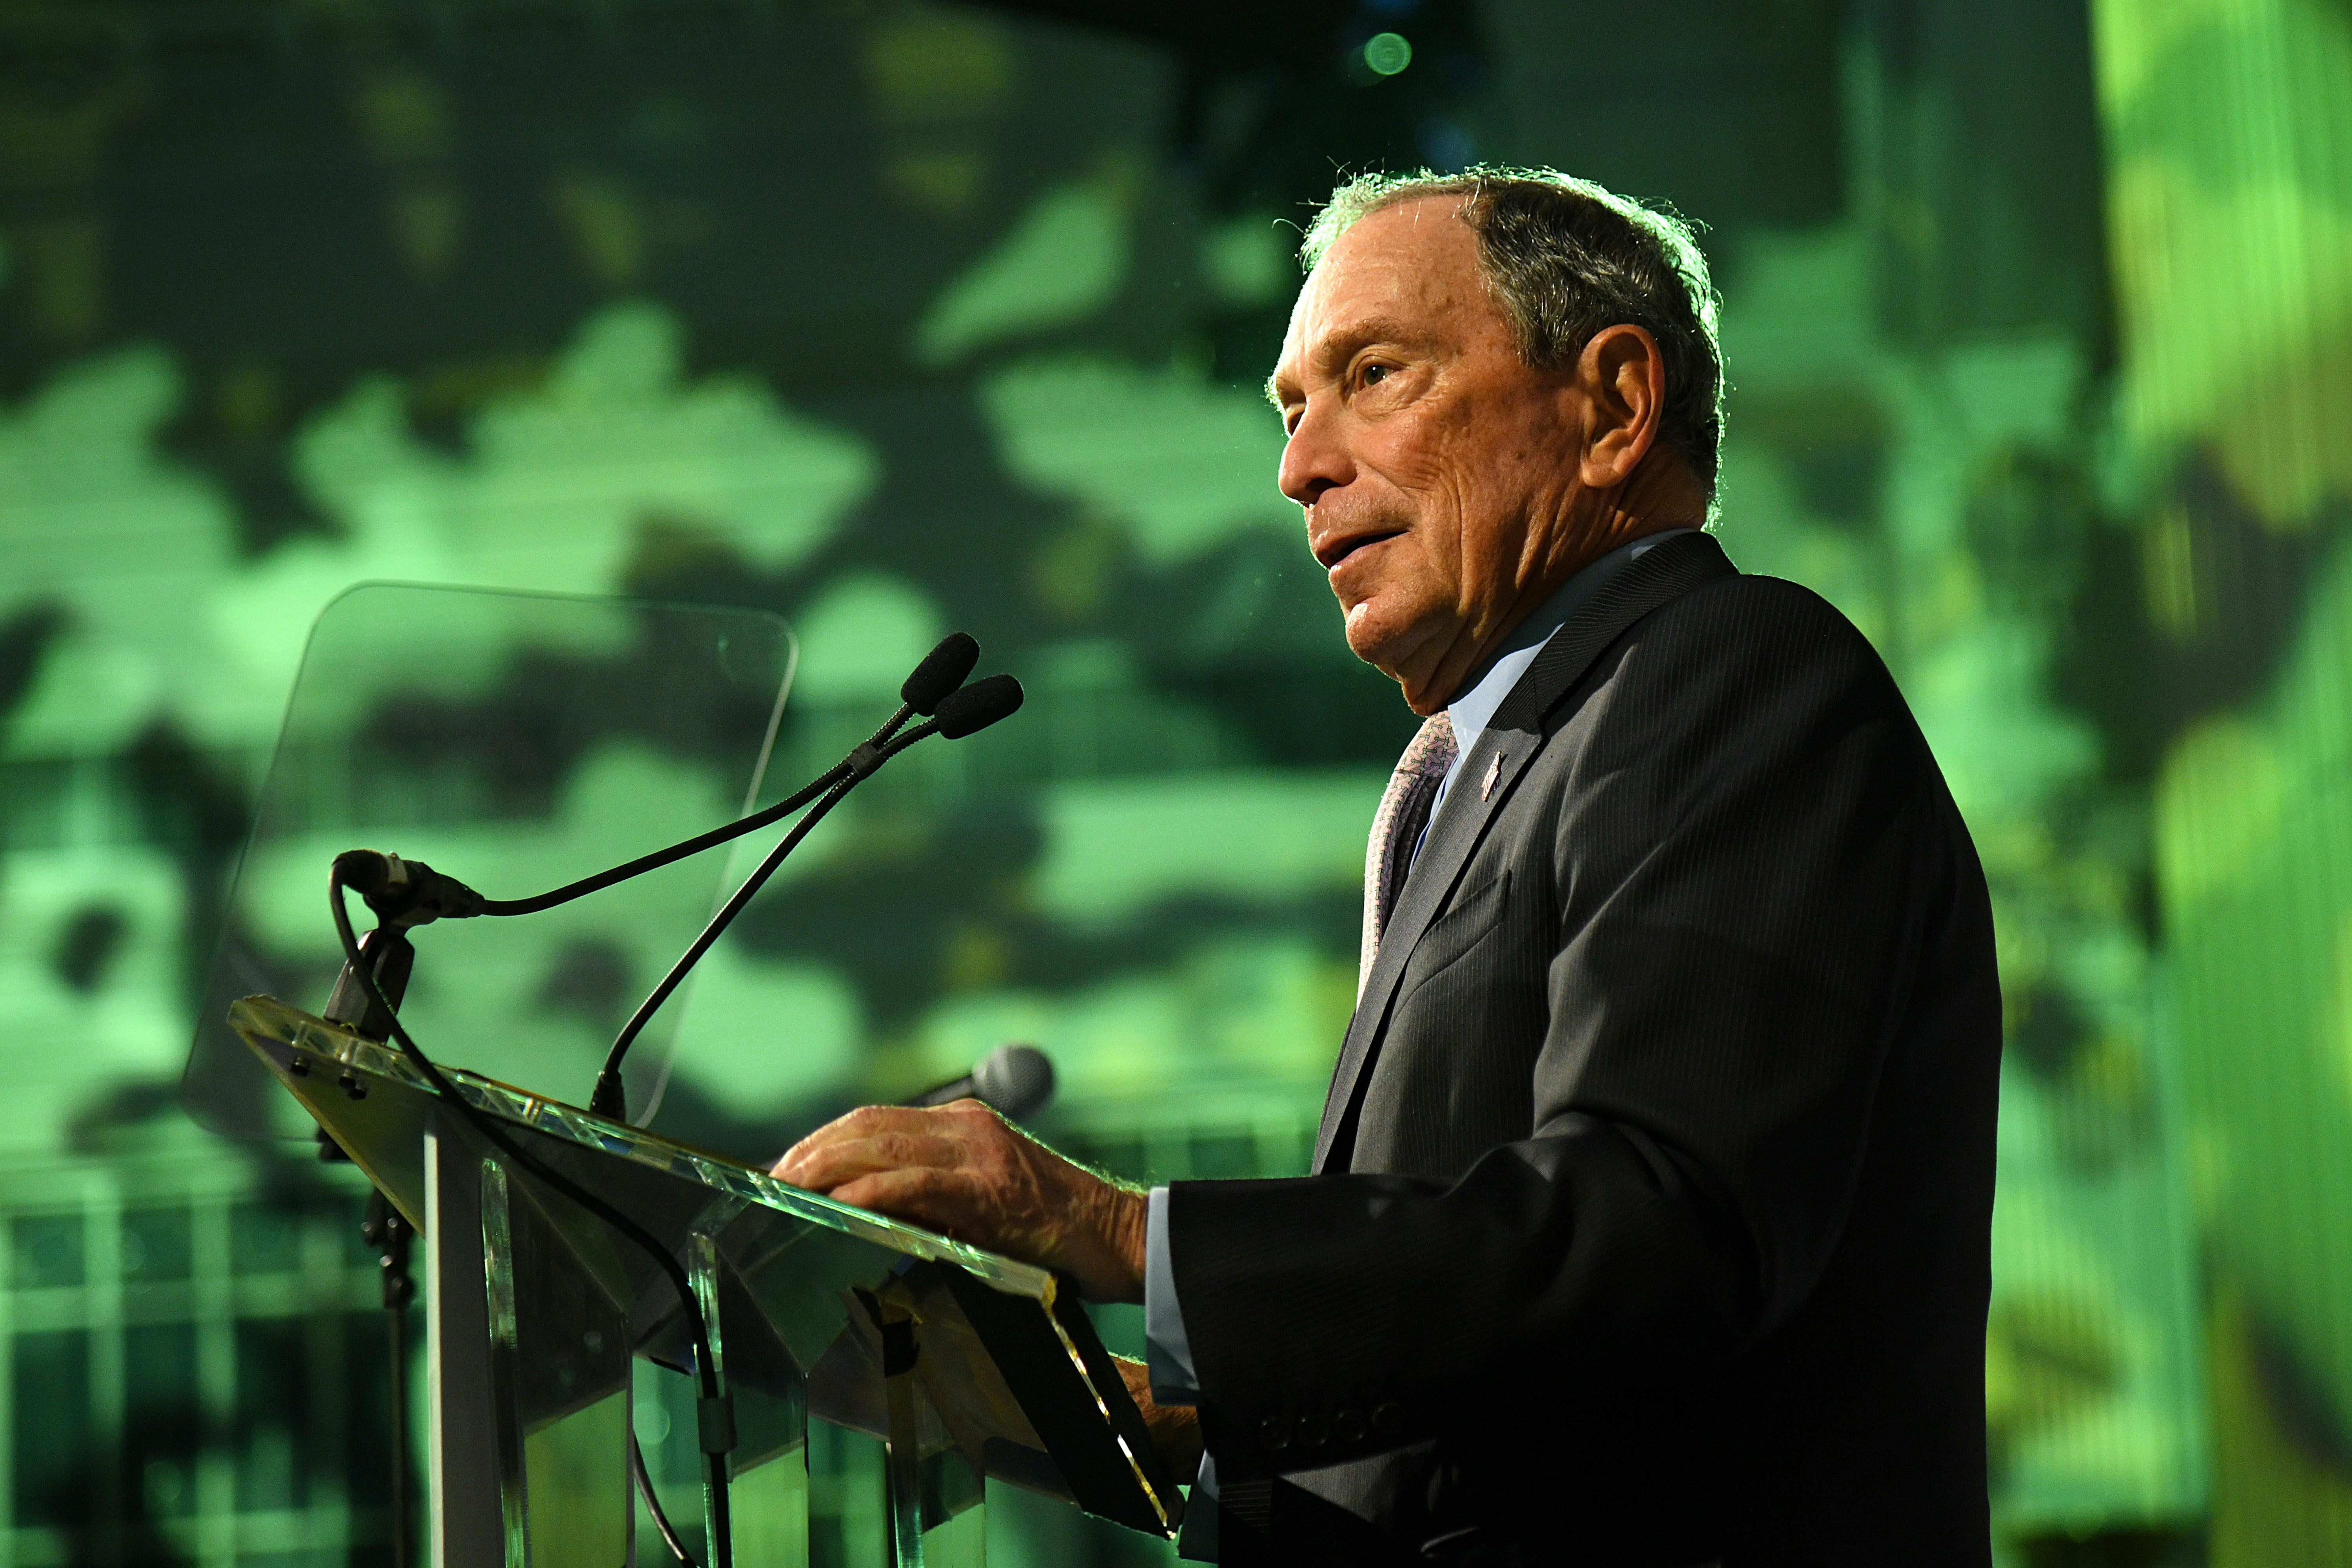 Michael Bloomberg speaks at a gala.